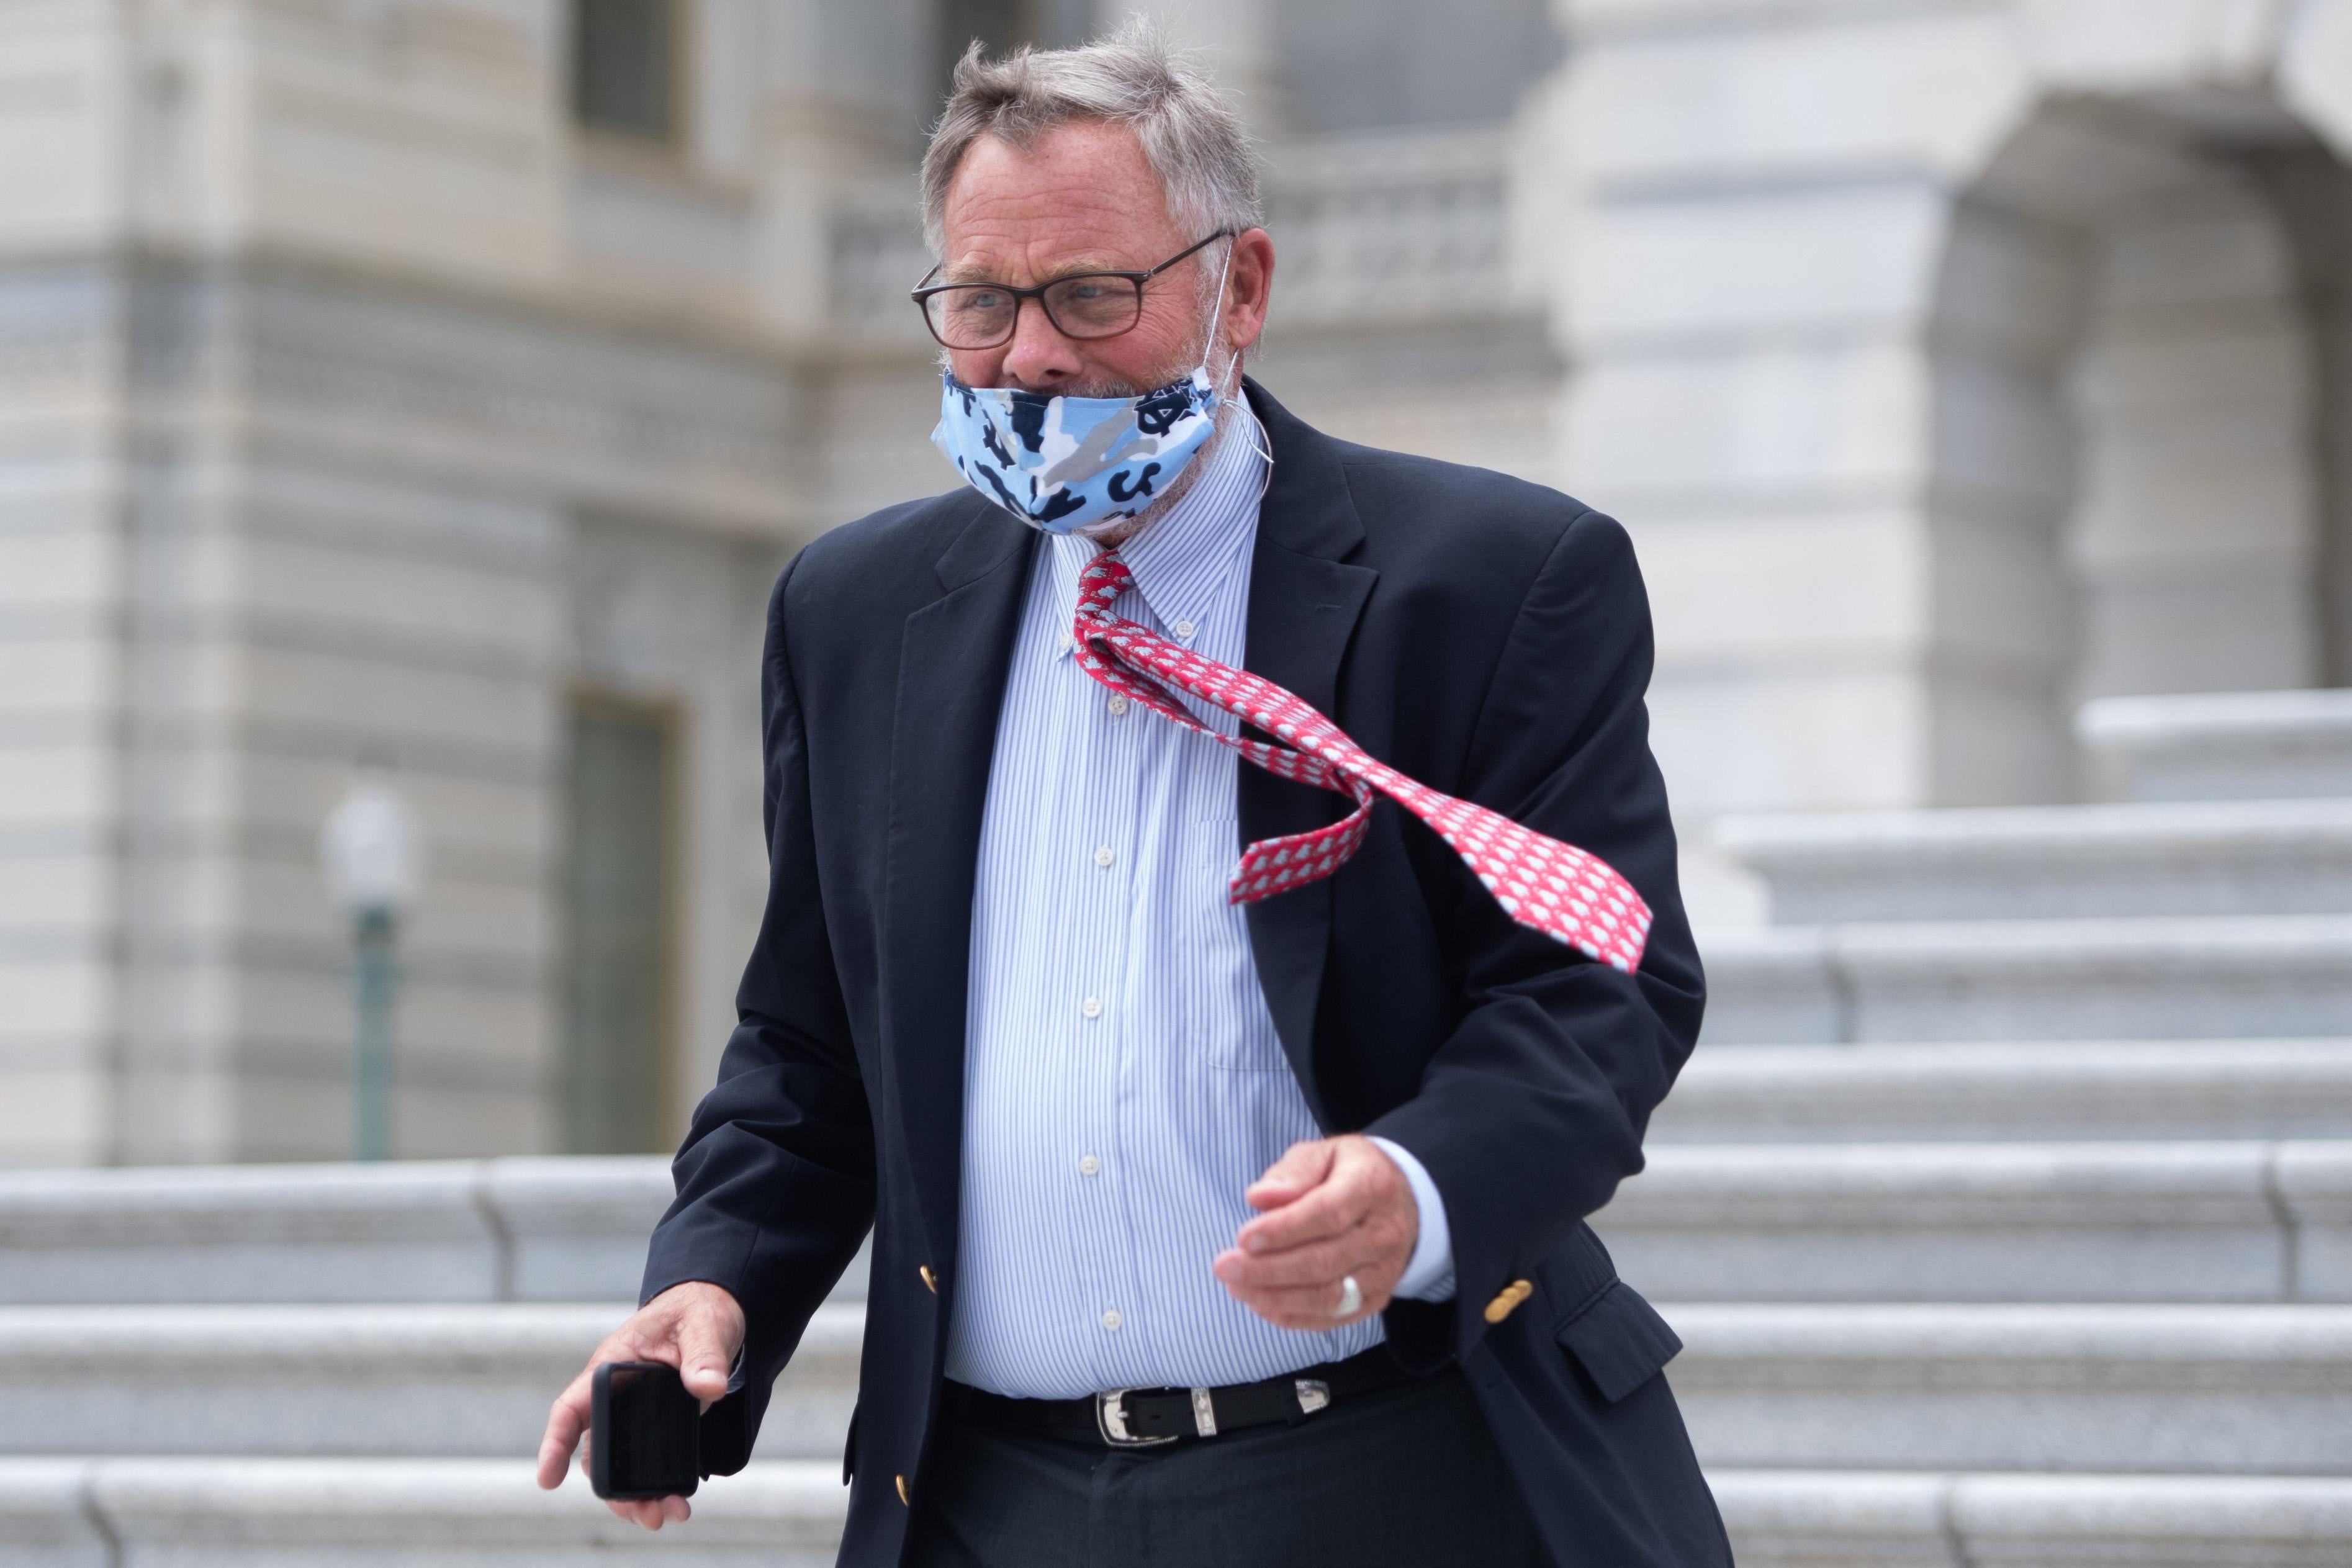 Richard Burr, wearing a face mask and carrying his cellphone, walks down stairs as wind blows his tie to the side.